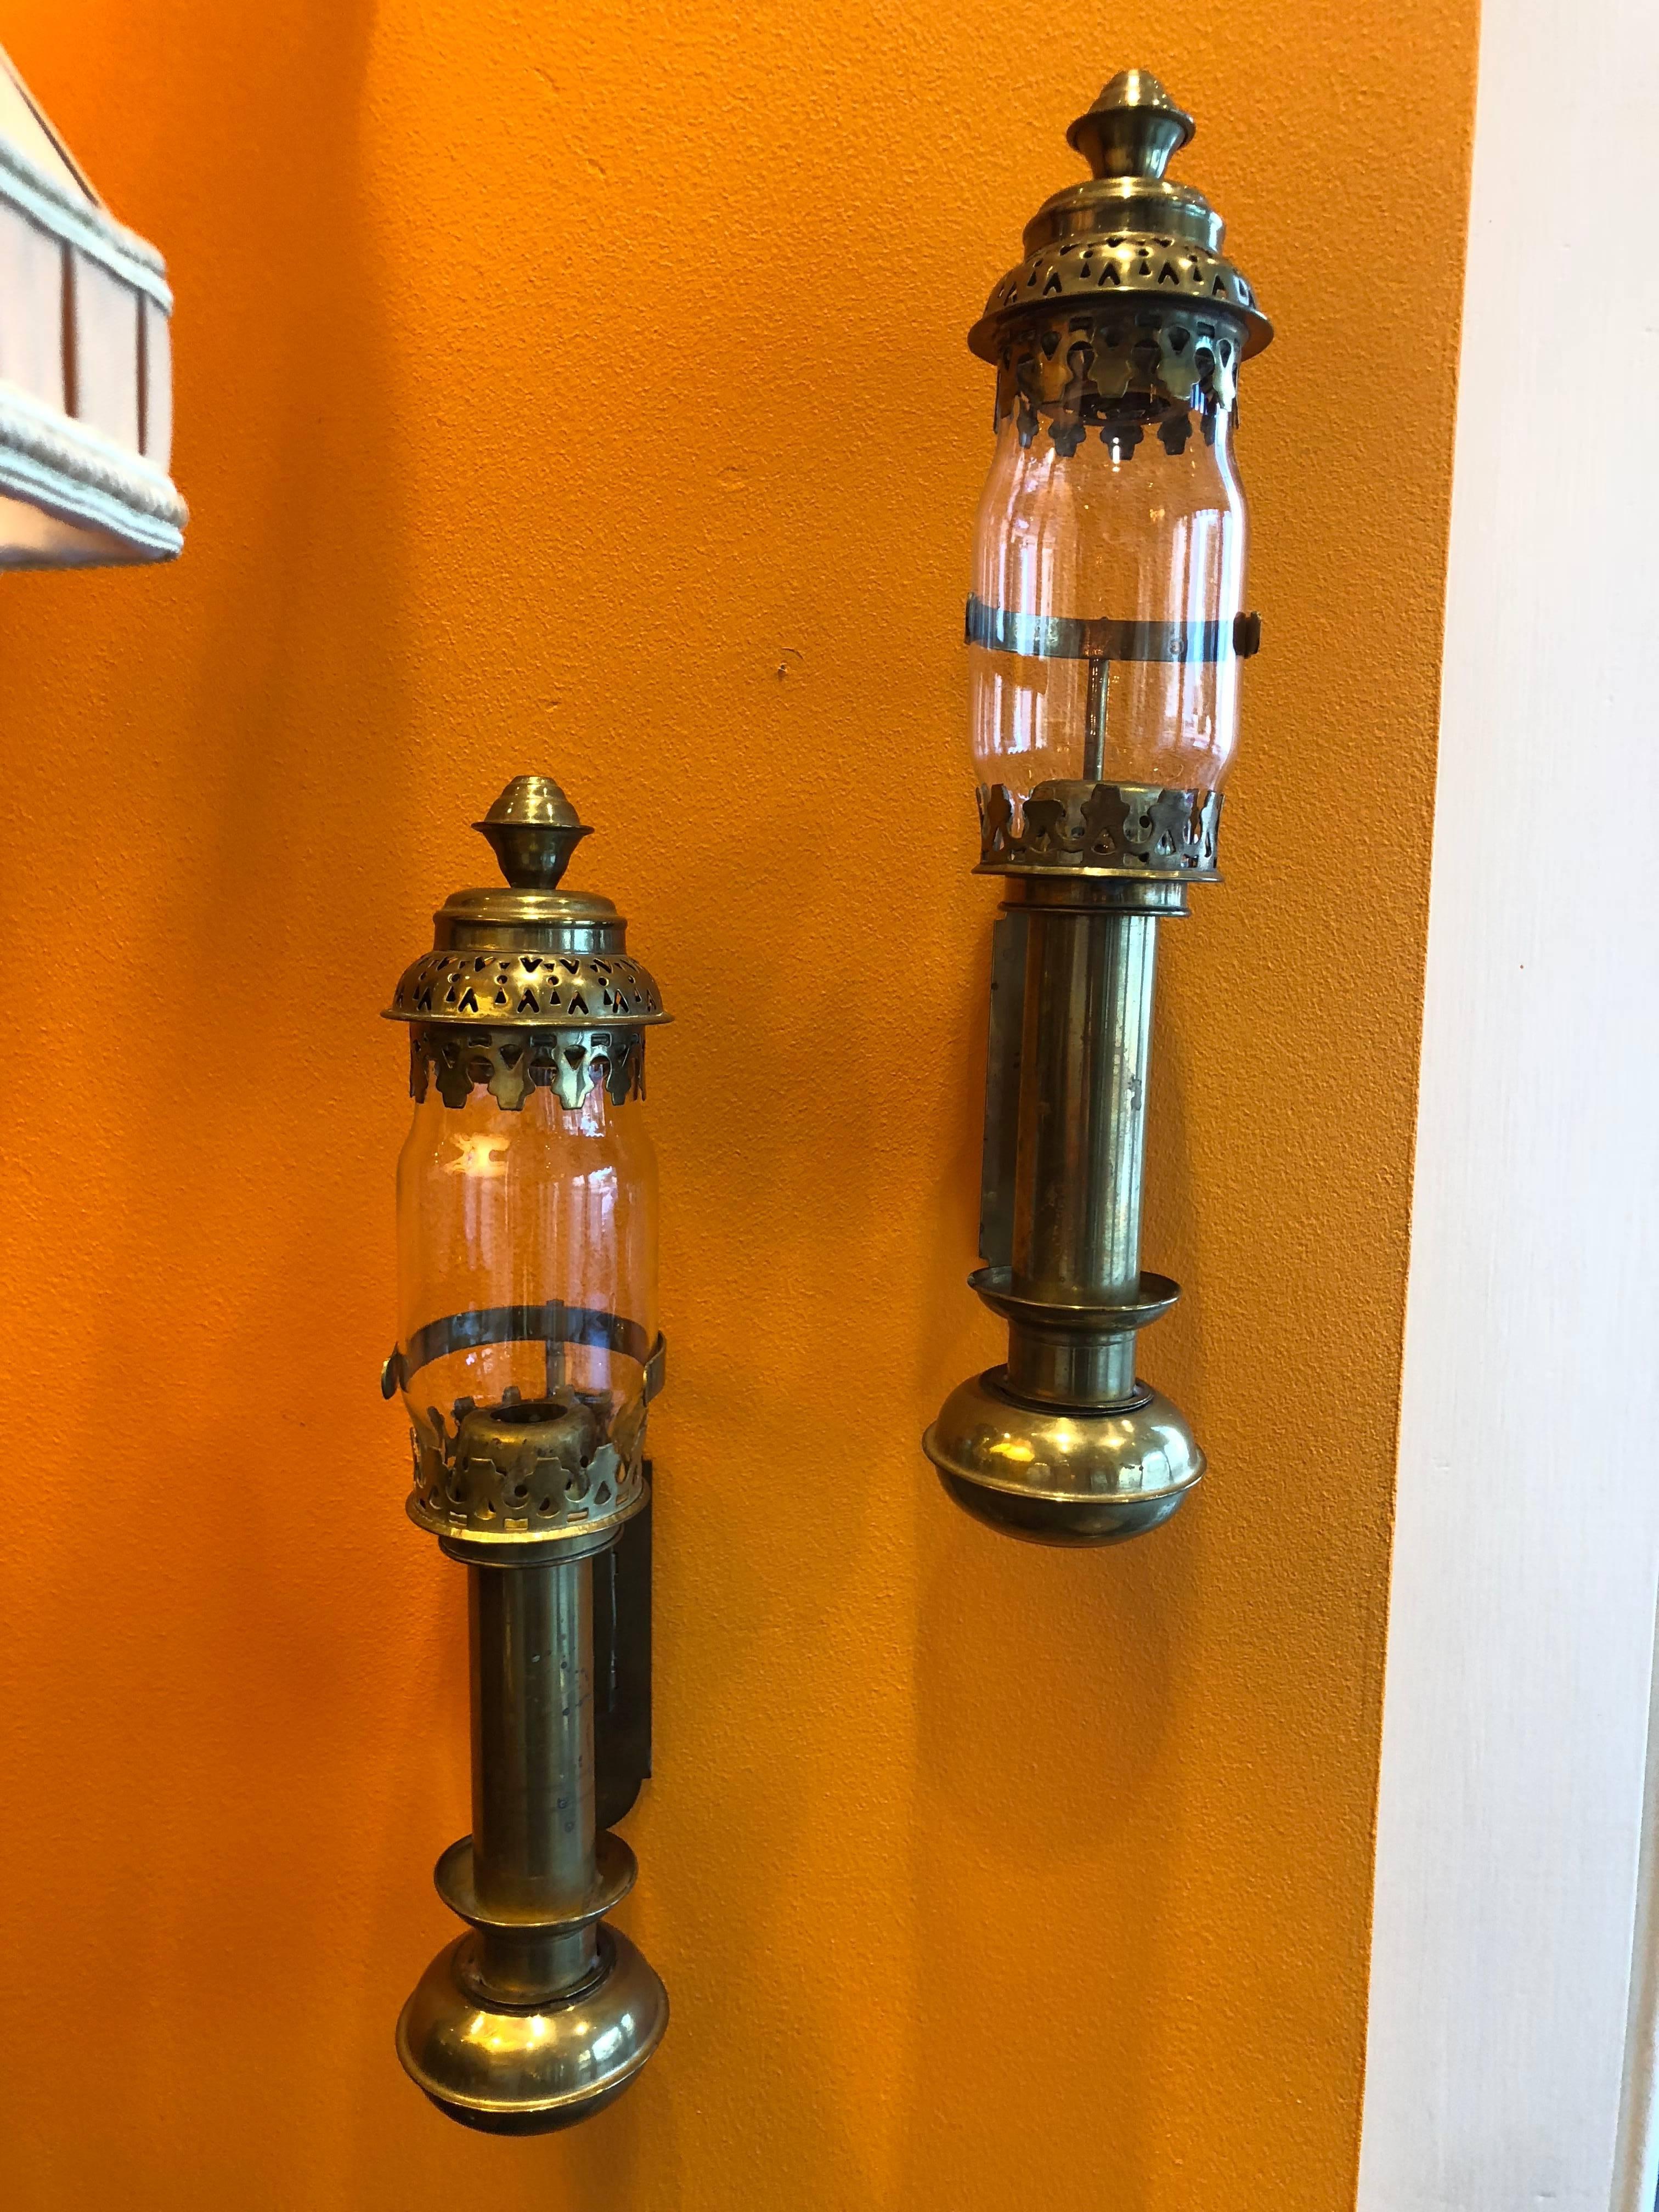 Small brass railway or ship passageway oil lamps from the early 20th century.